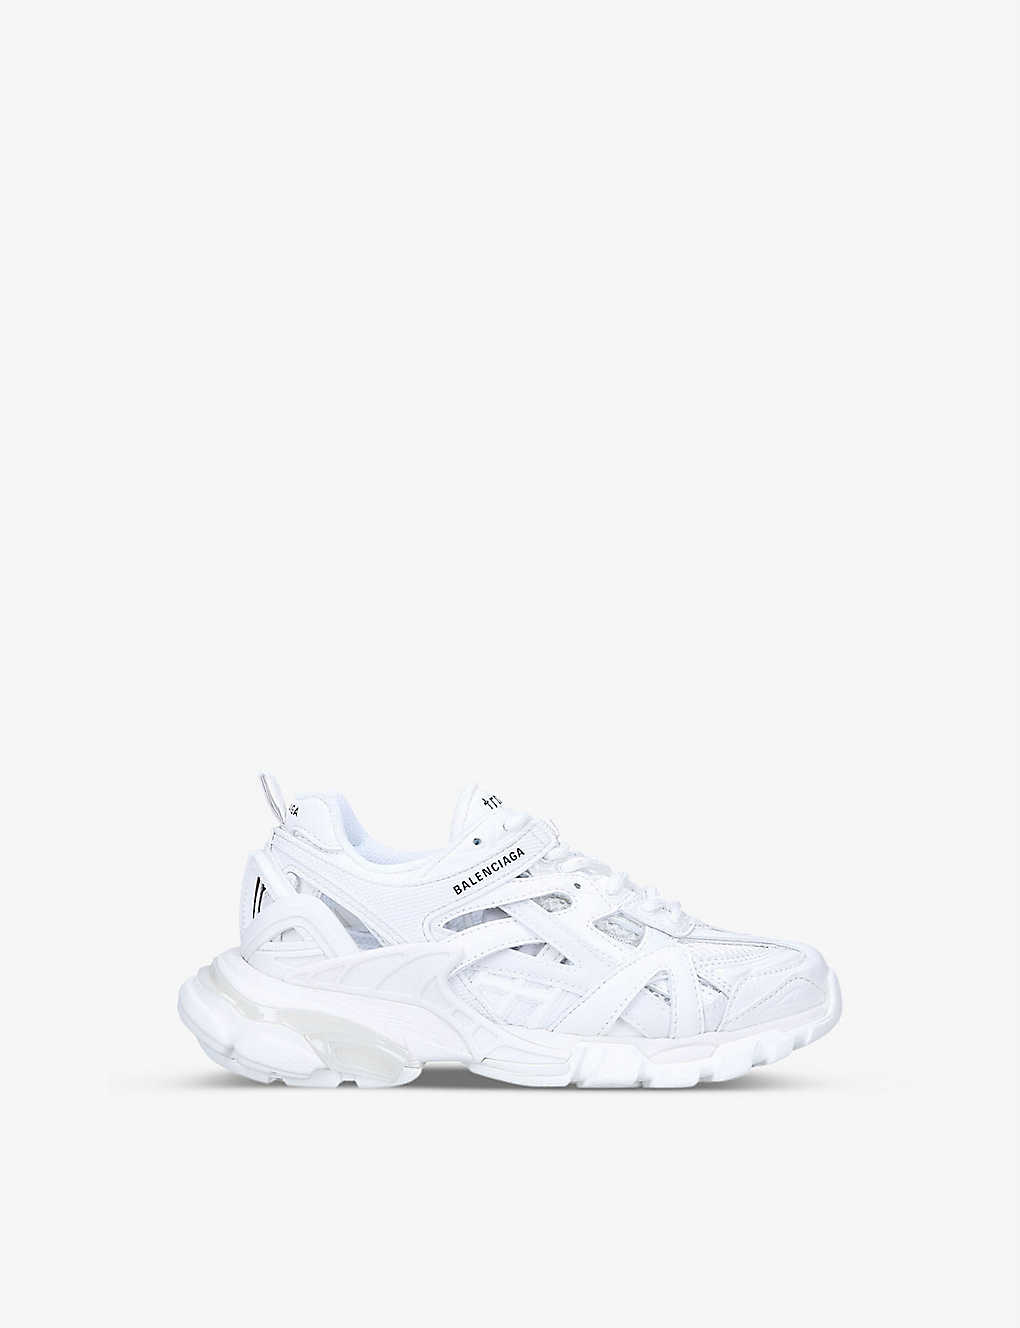 Shop Balenciaga Boys White Kids Track Panelled Mesh-woven Trainers 4-8 Years